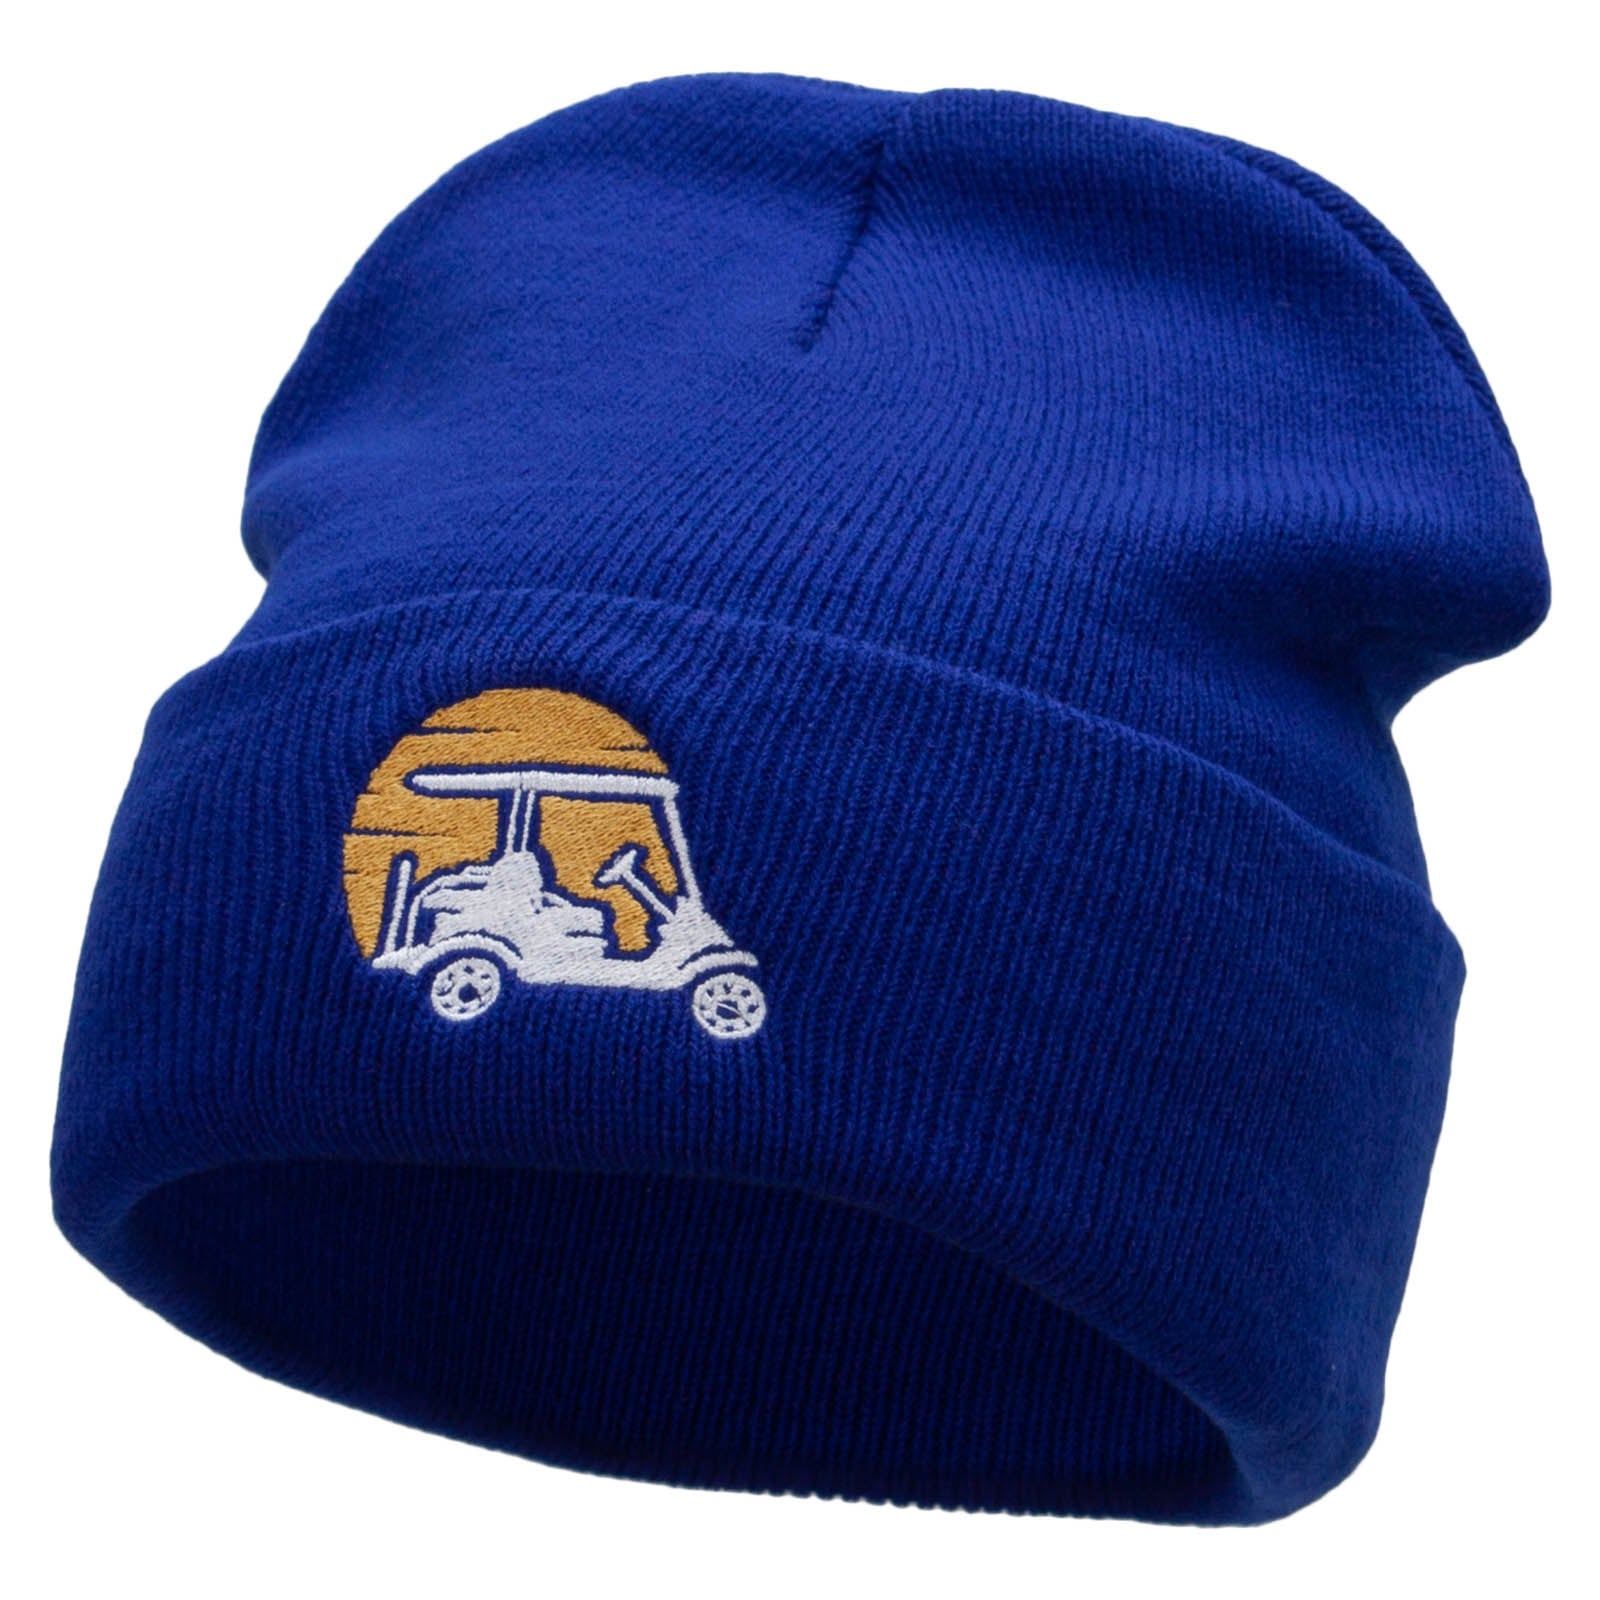 Rise and Golf Embroidered 12 Inch Long Knitted Beanie - Royal OSFM